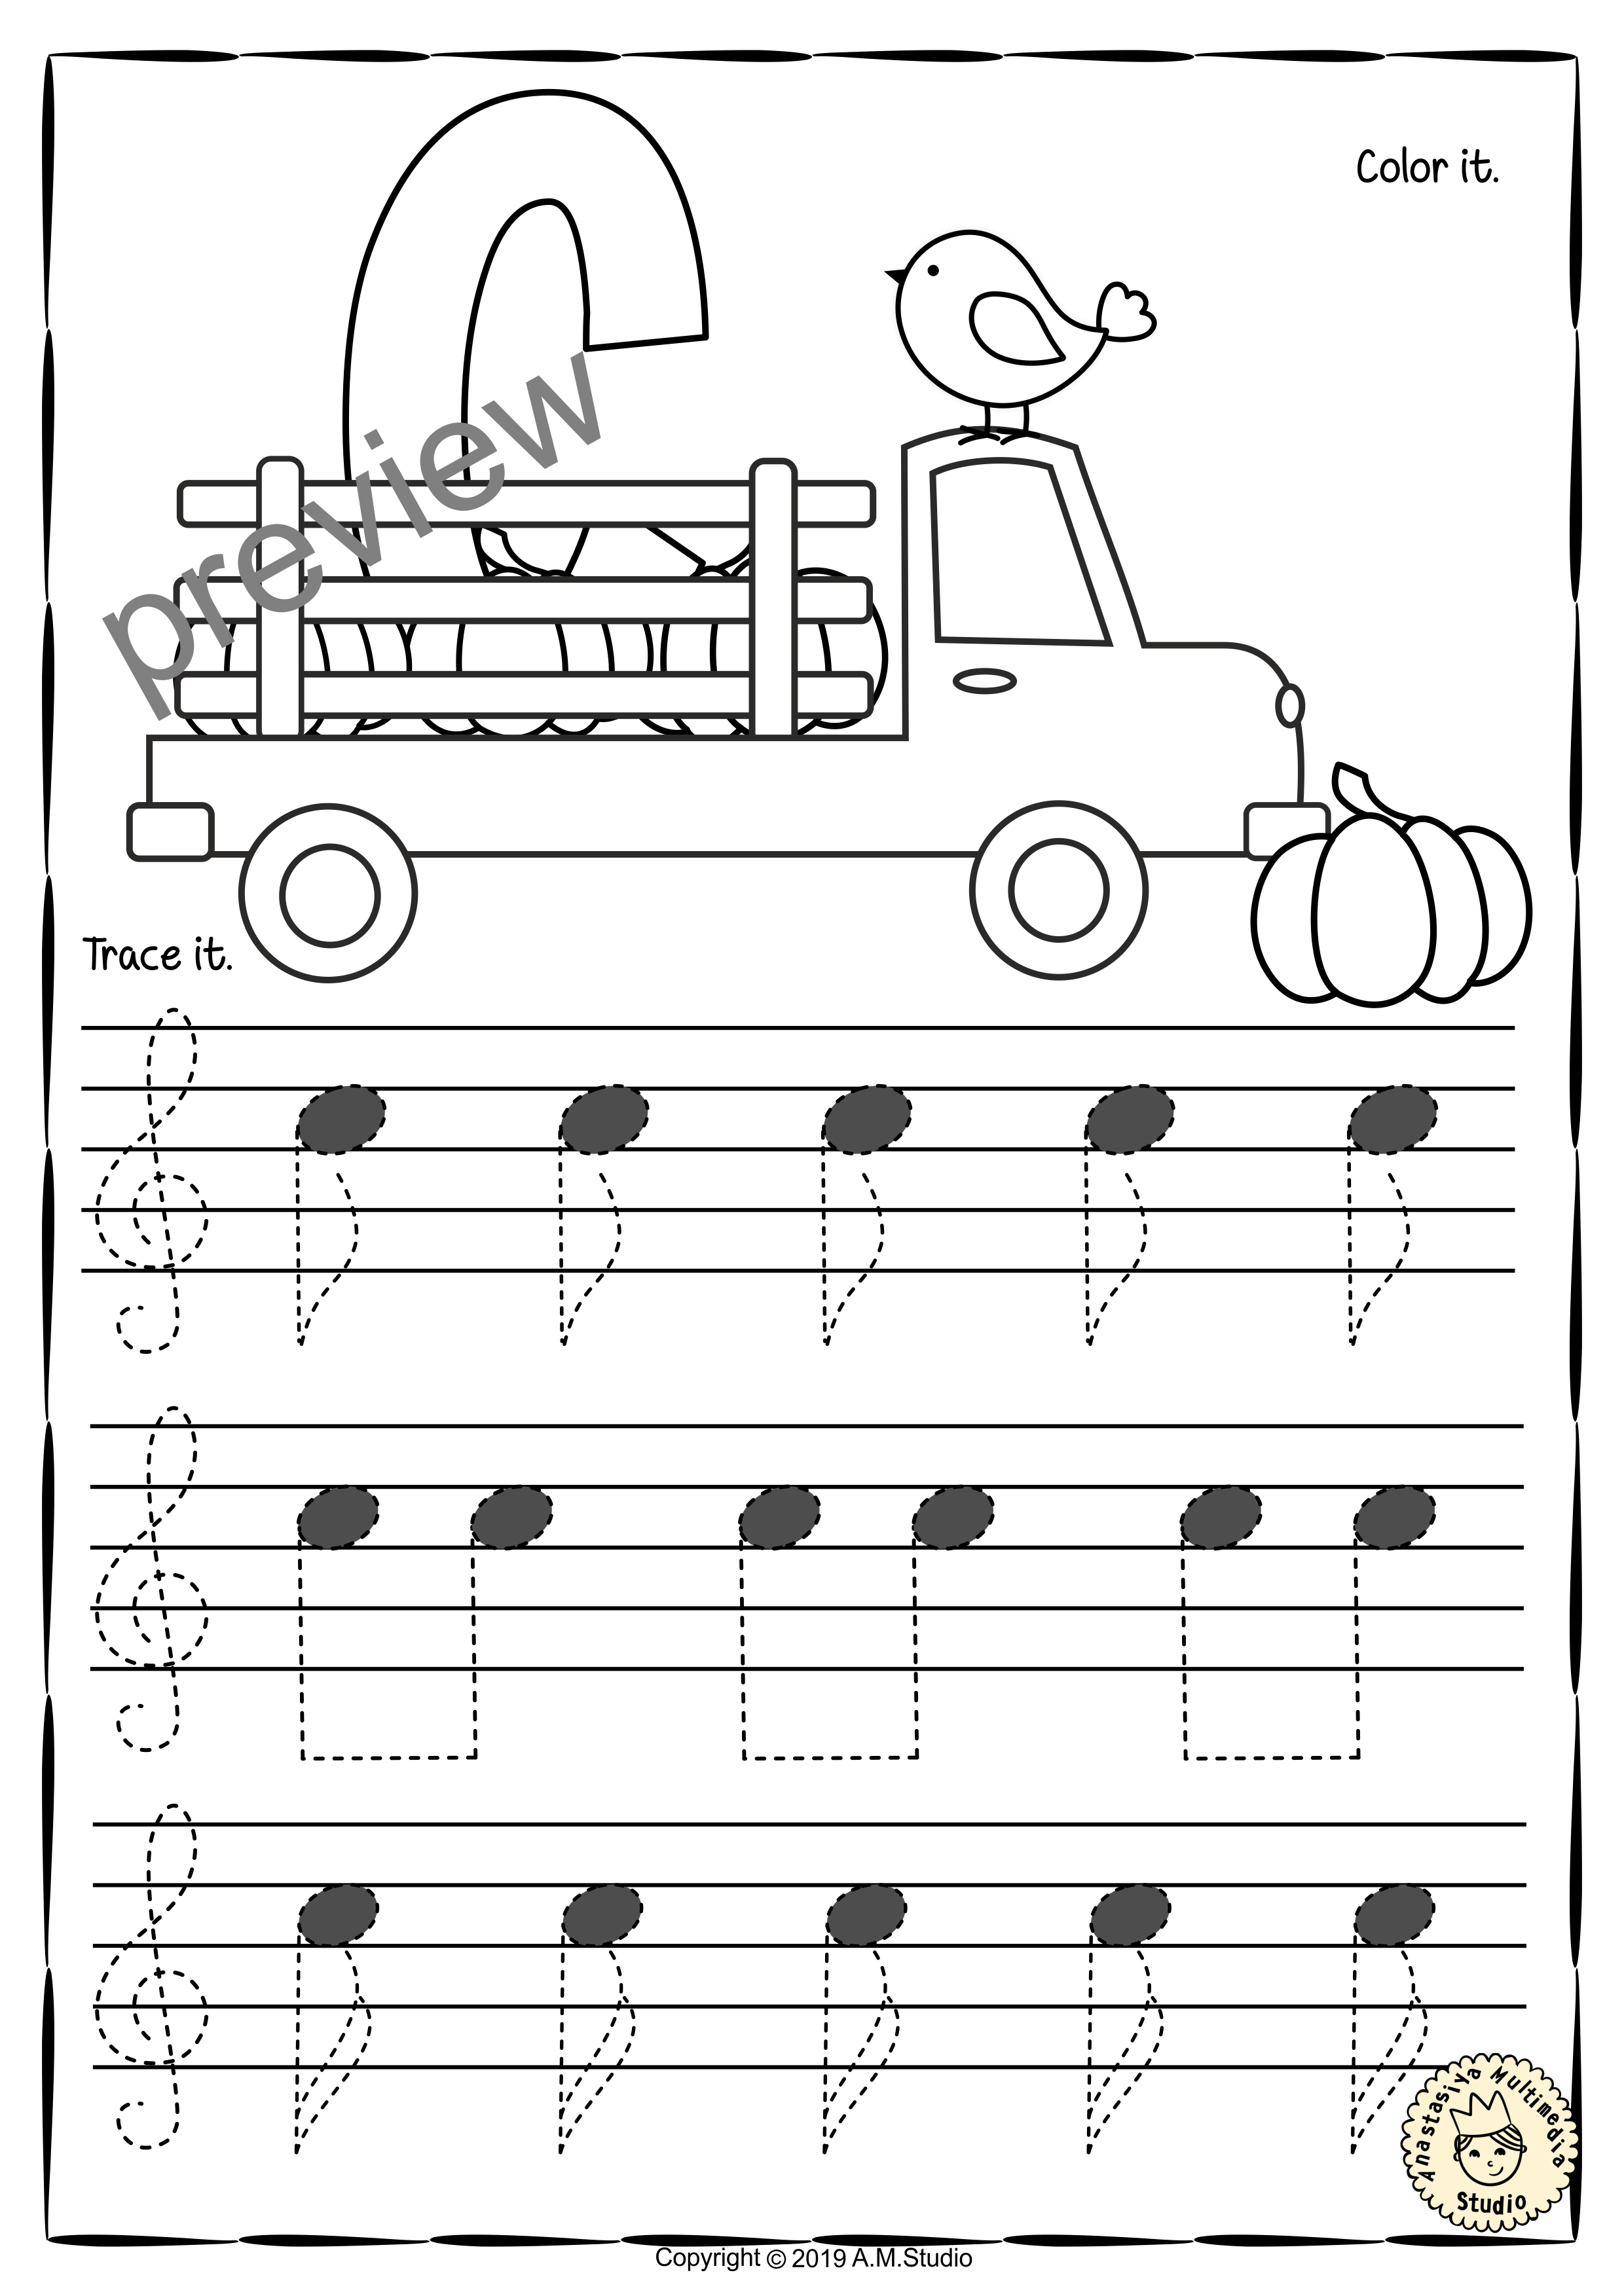 Treble Clef Tracing Music Notes Worksheets for Fall (img # 4)